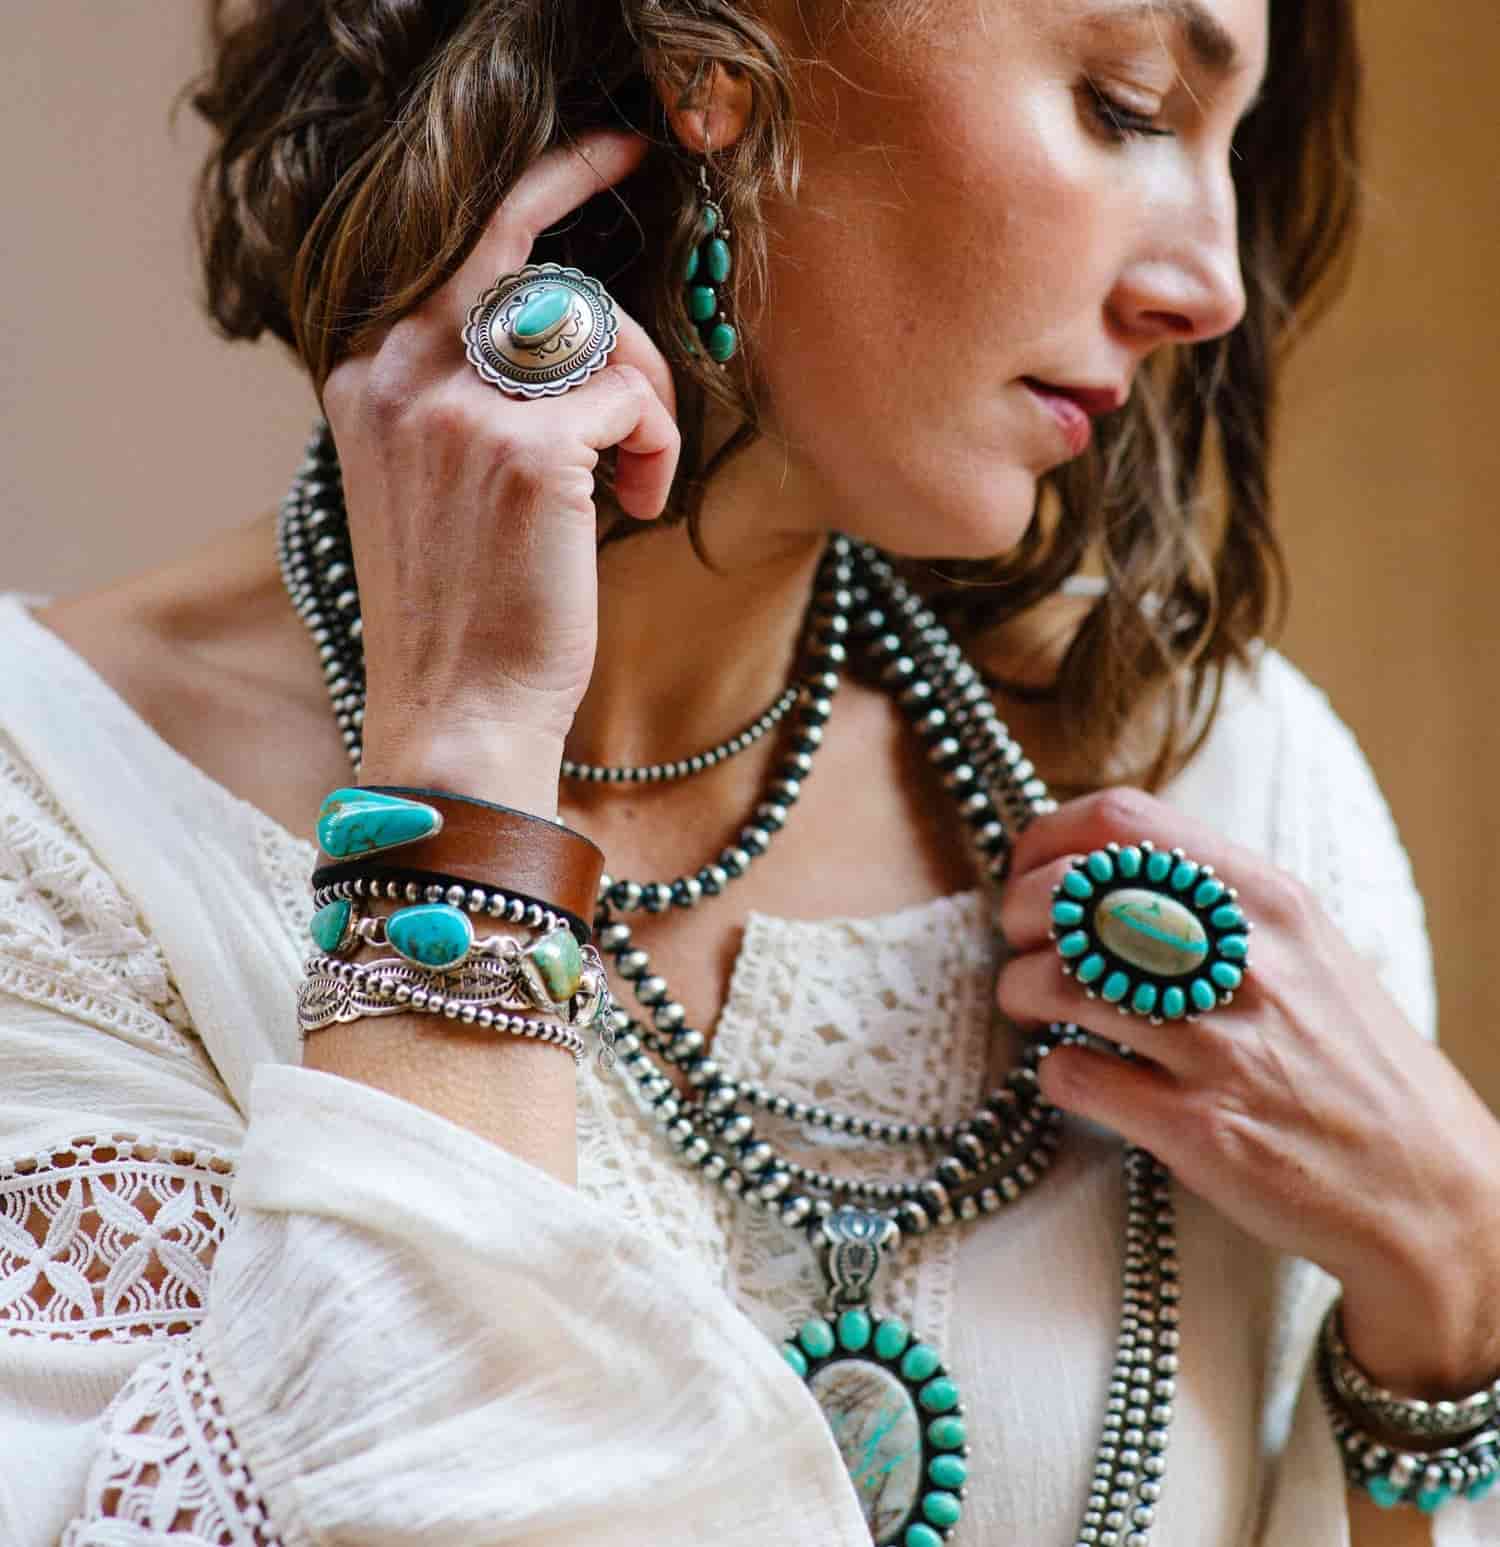 Turquoise Stone & Crystal Jewelry - Meaning, Benefits, Properties